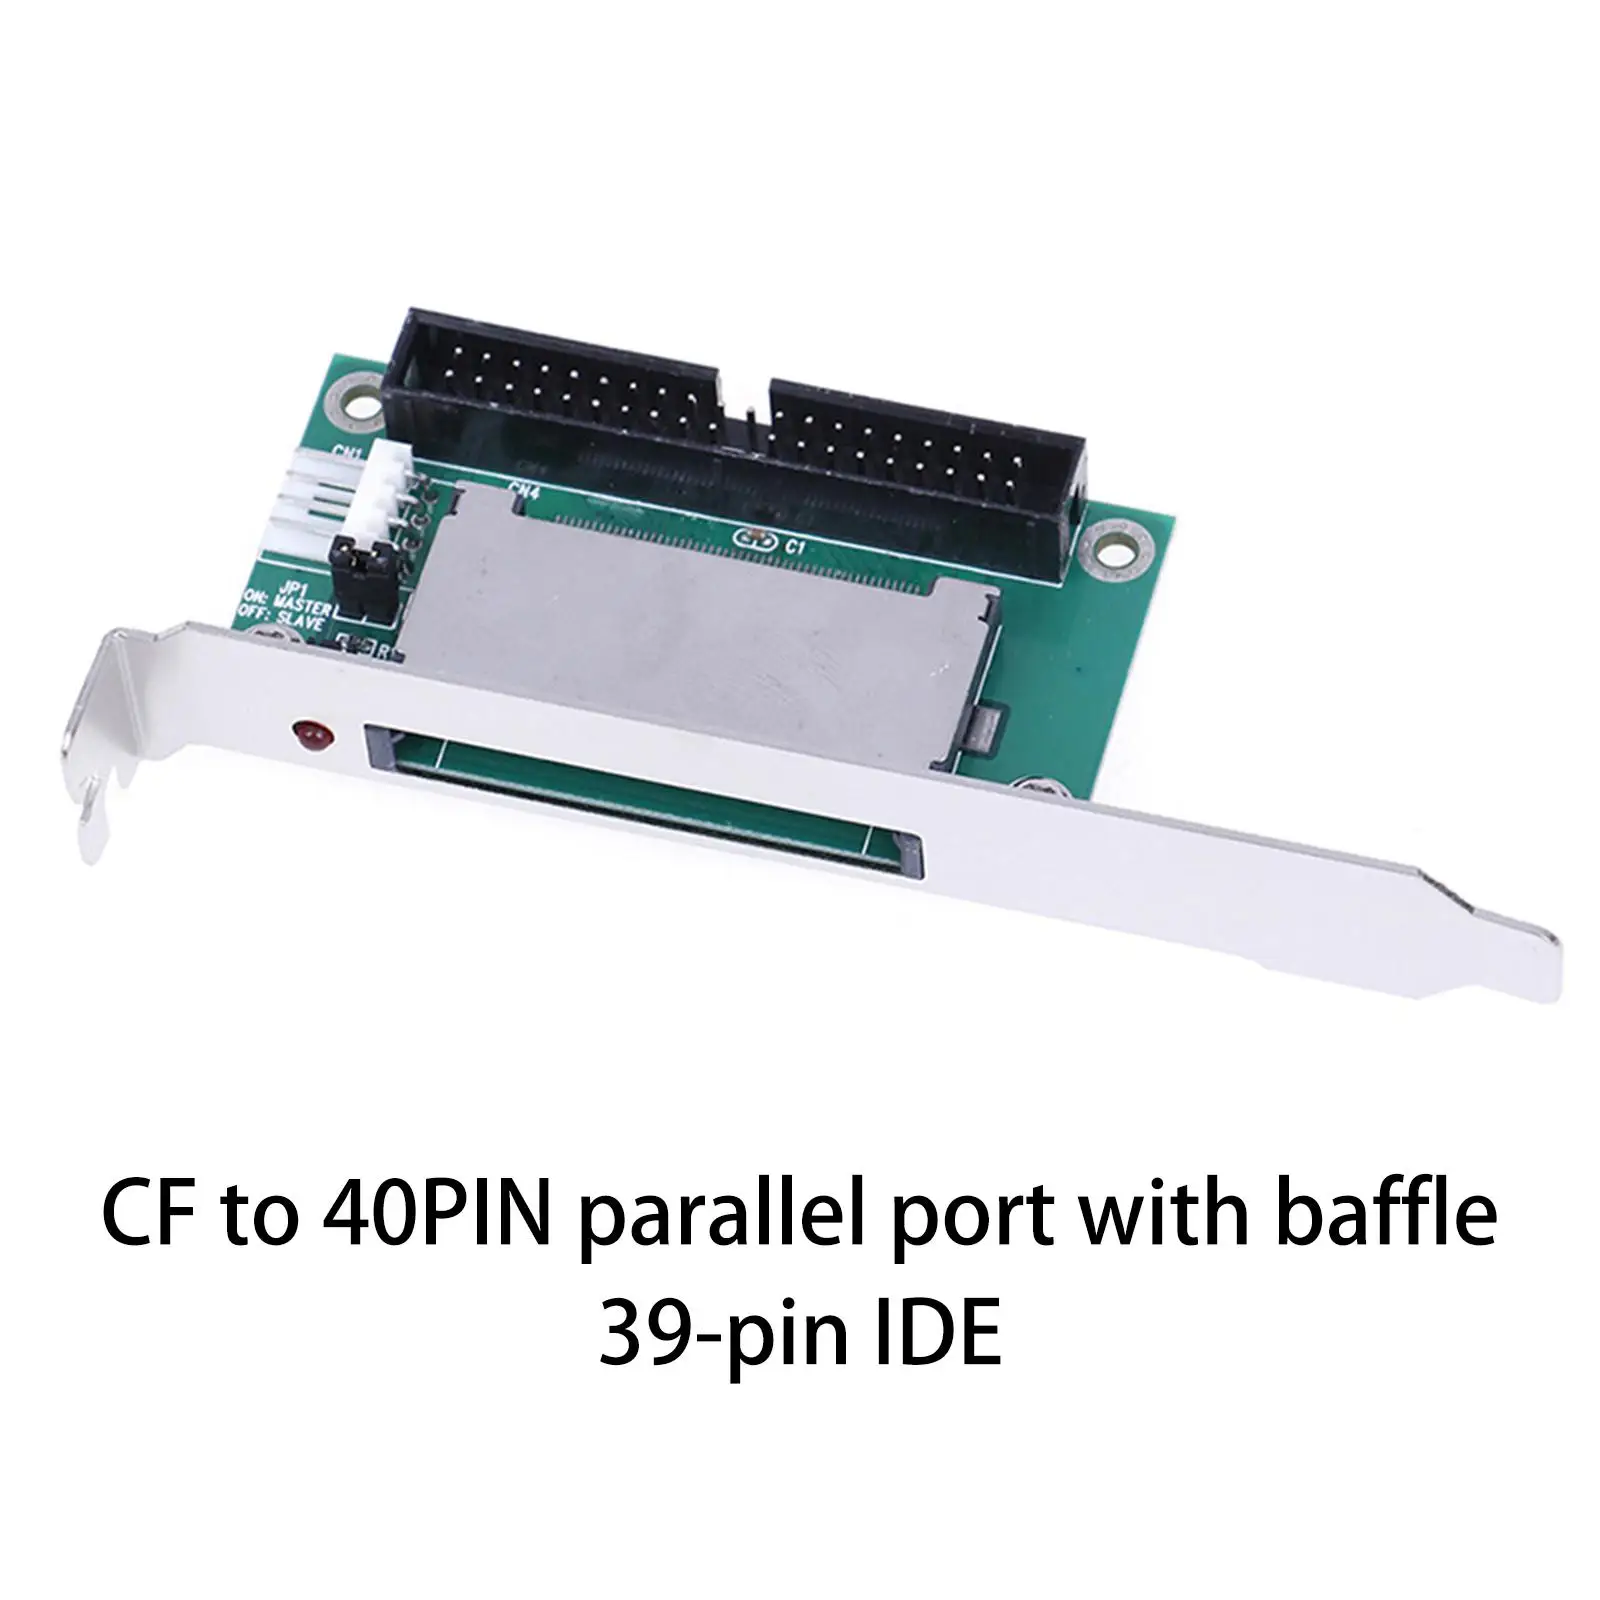 CF ide Adapter, CF Compact Flash Card to 3.5 IDE Converter, Back Panel Connector for Computer Desktop